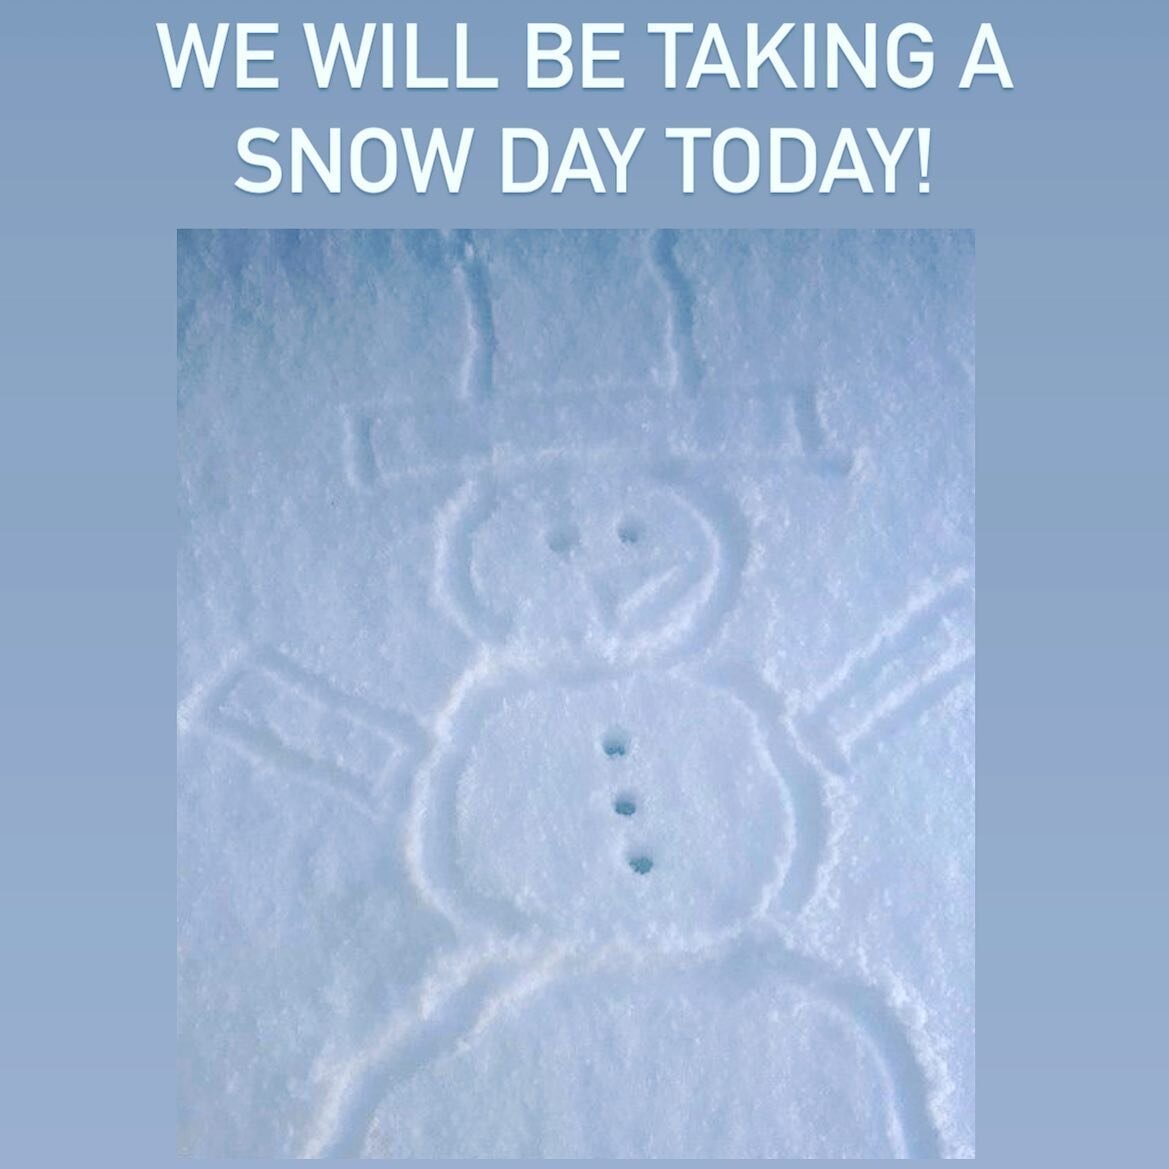 Due to all of the snow and closures in the passes, we will be closed today! We hope everyone stays safe and warm! 
.
#snowmageddon2021 #snowday #leavenworth #leavenworth_wa #cascademountains #soomuchsnow❄️⛄️ #snowman